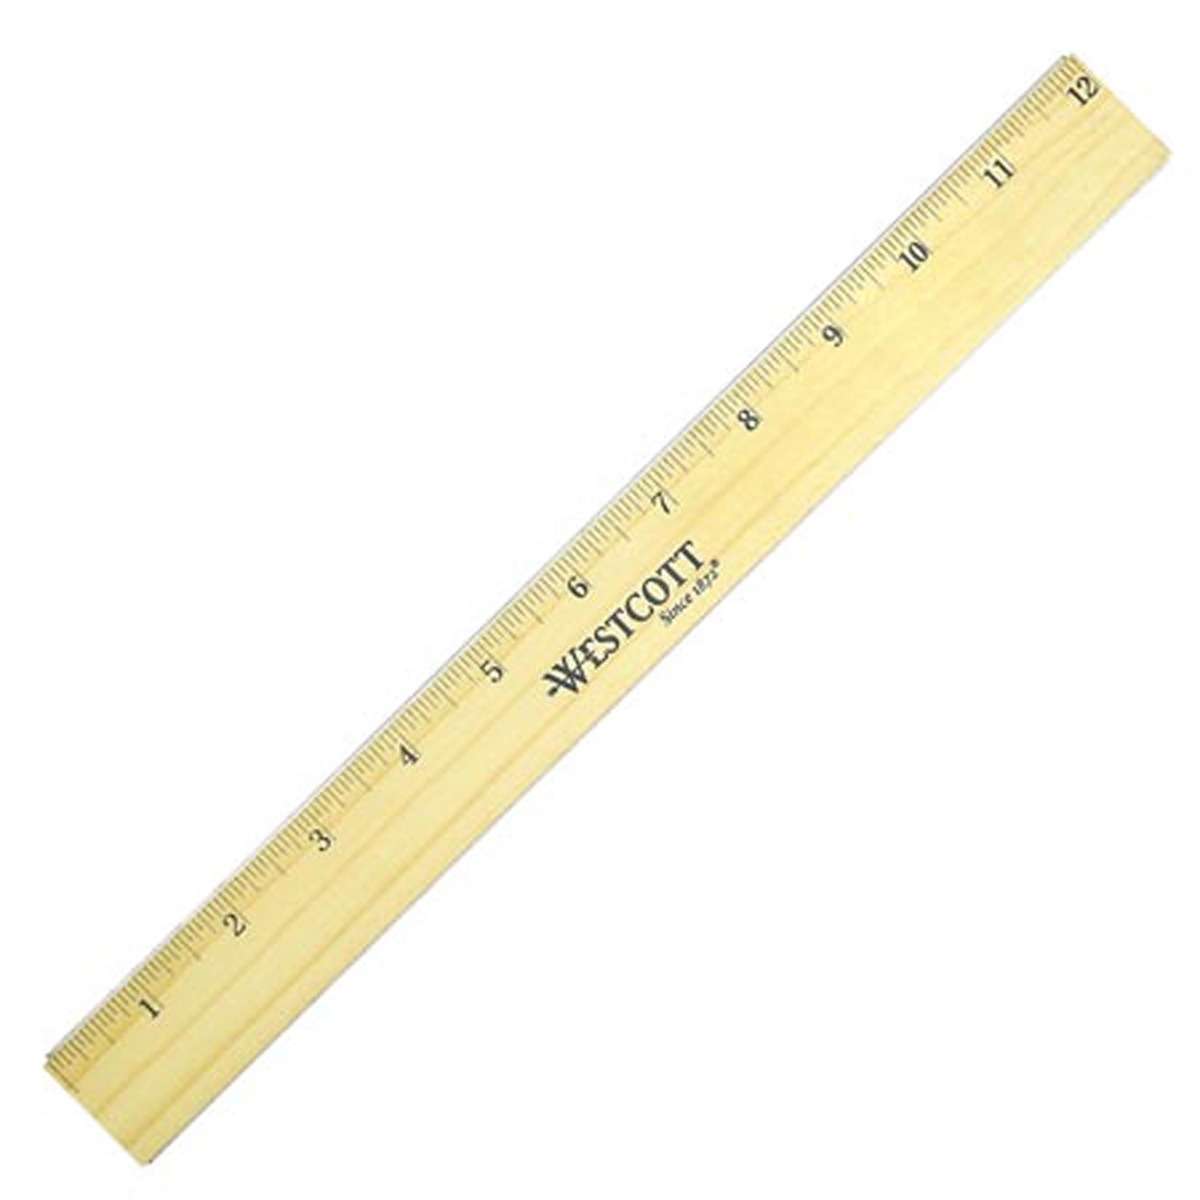 Westcott Ruler with Double Brass Edge, 12-Inch (05221)